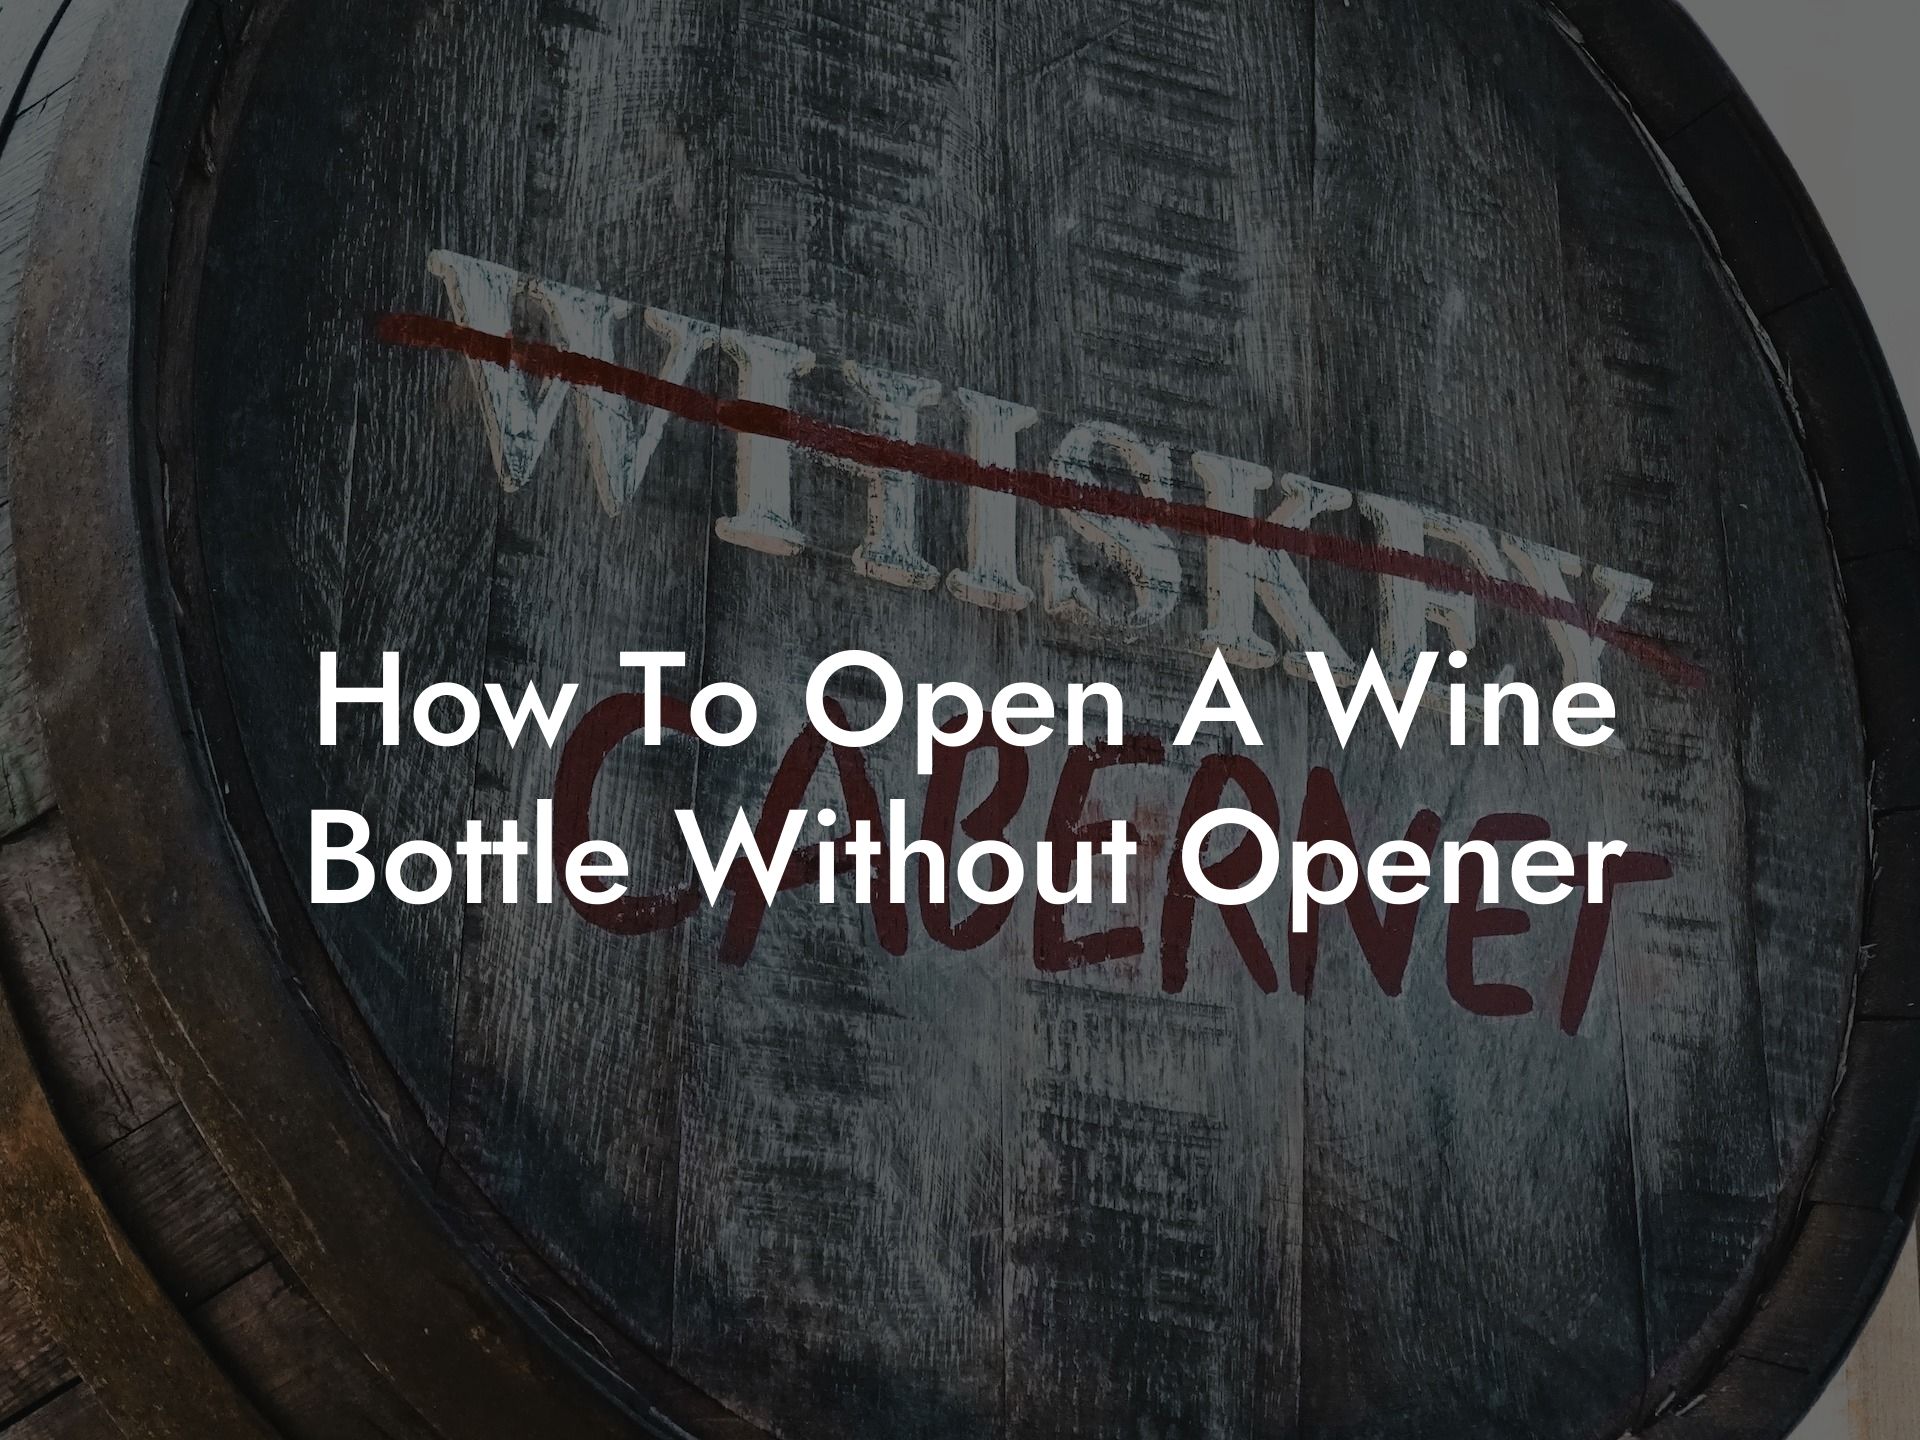 How To Open A Wine Bottle Without Opener